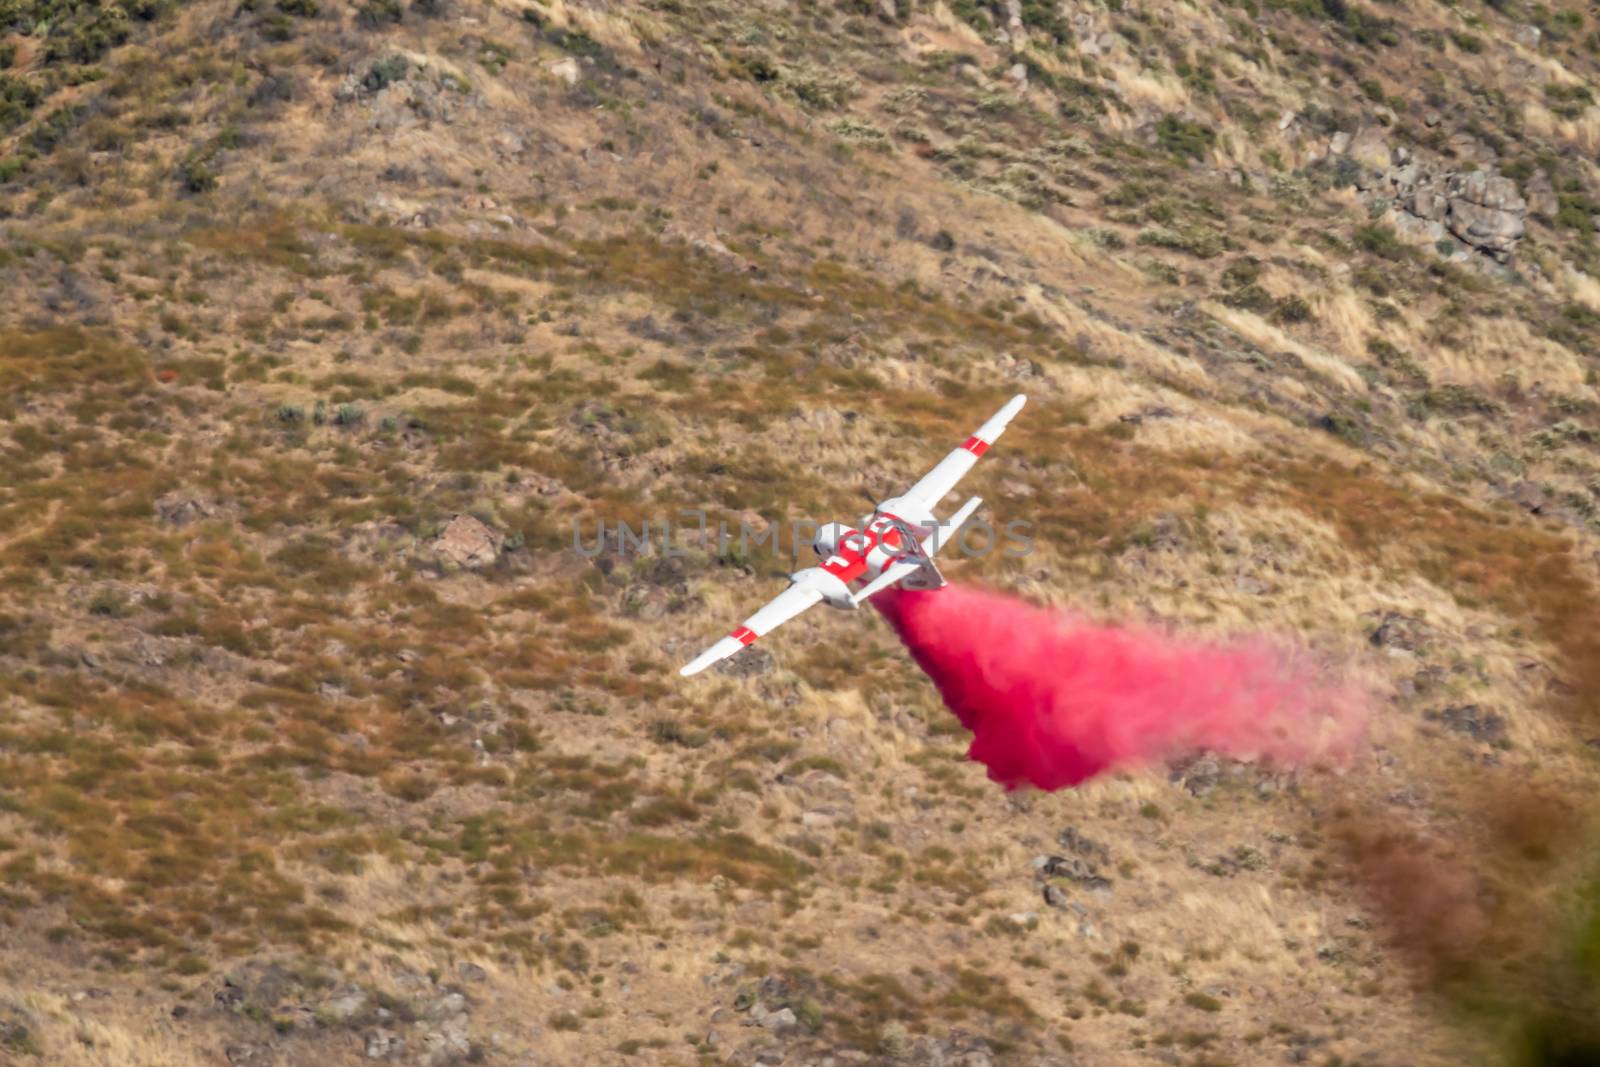 Winchester, CA USA - June 14, 2020: Cal Fire aircraft drops fire retardant on a dry hilltop wildfire near Winchester, California. by Feverpitched